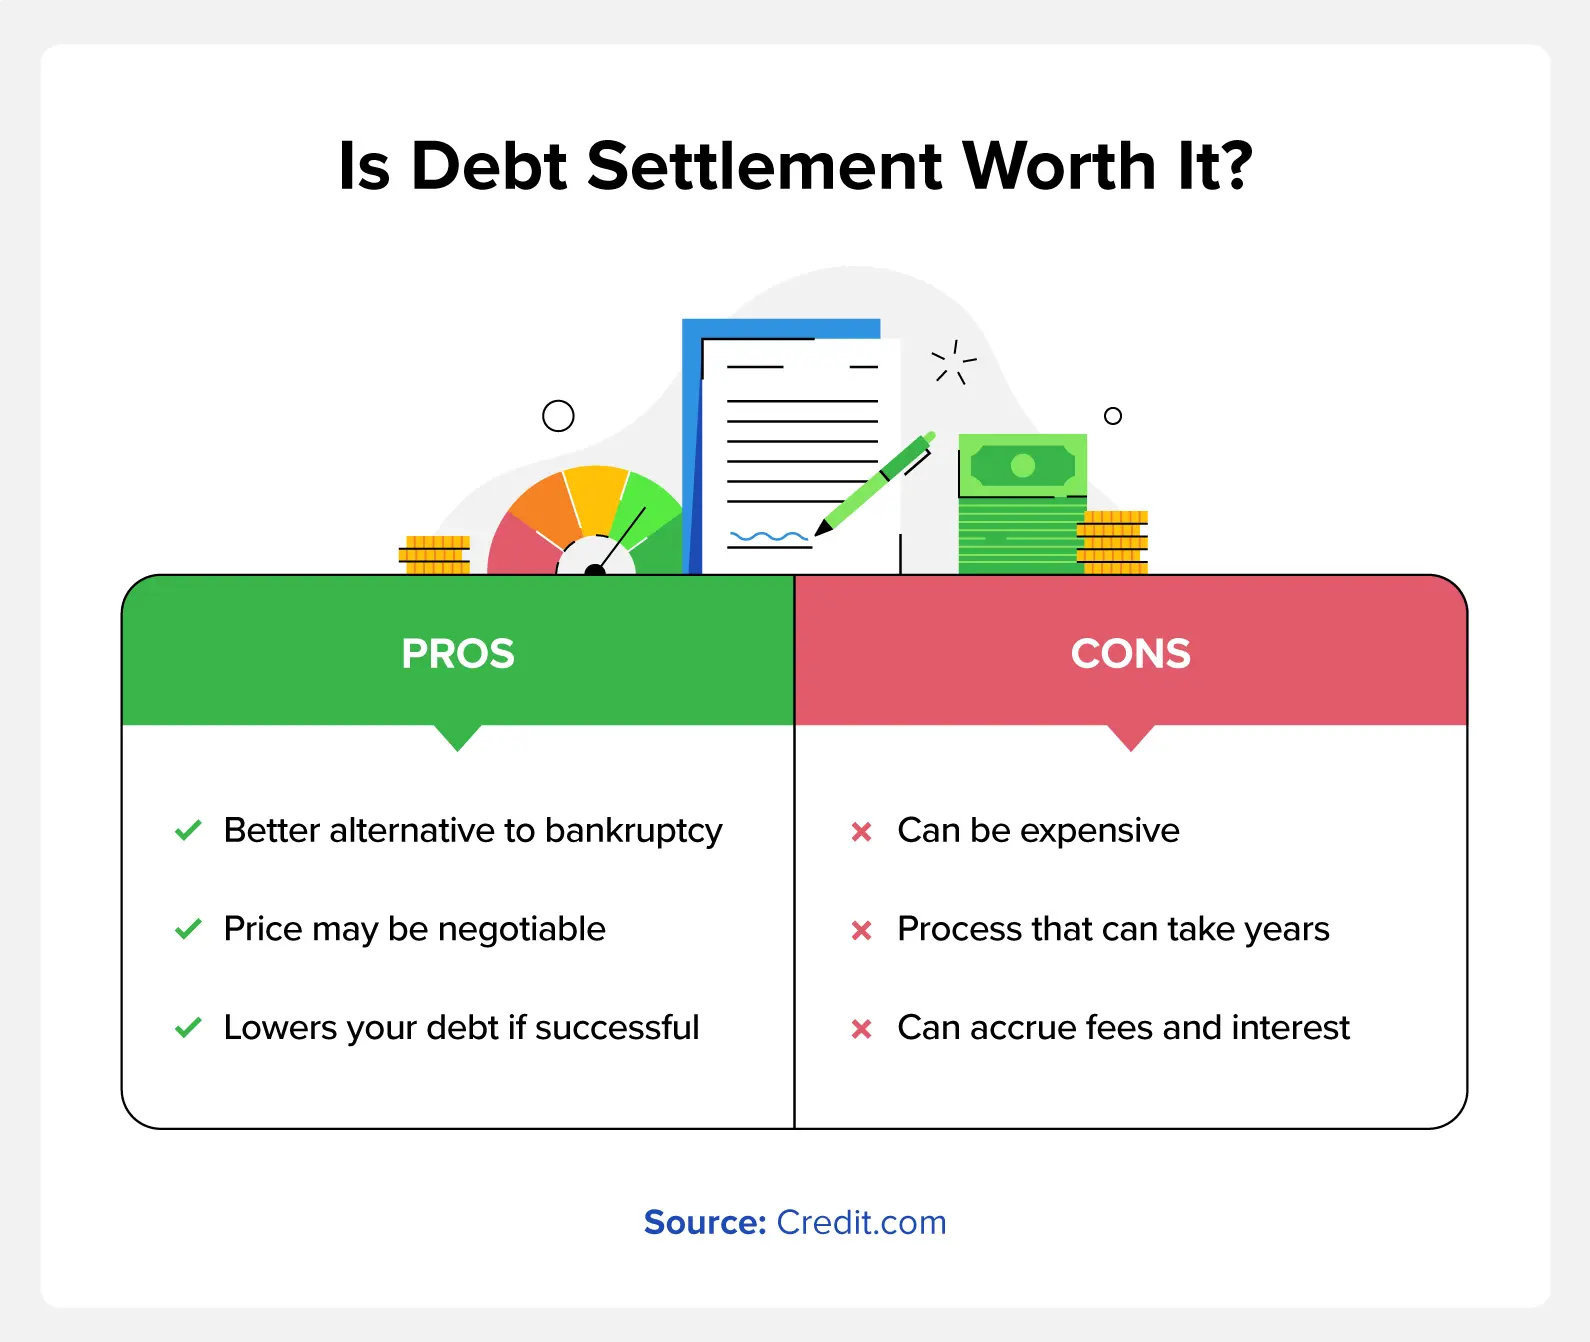 An “Is debt settlement worth it?” pros and cons graphic